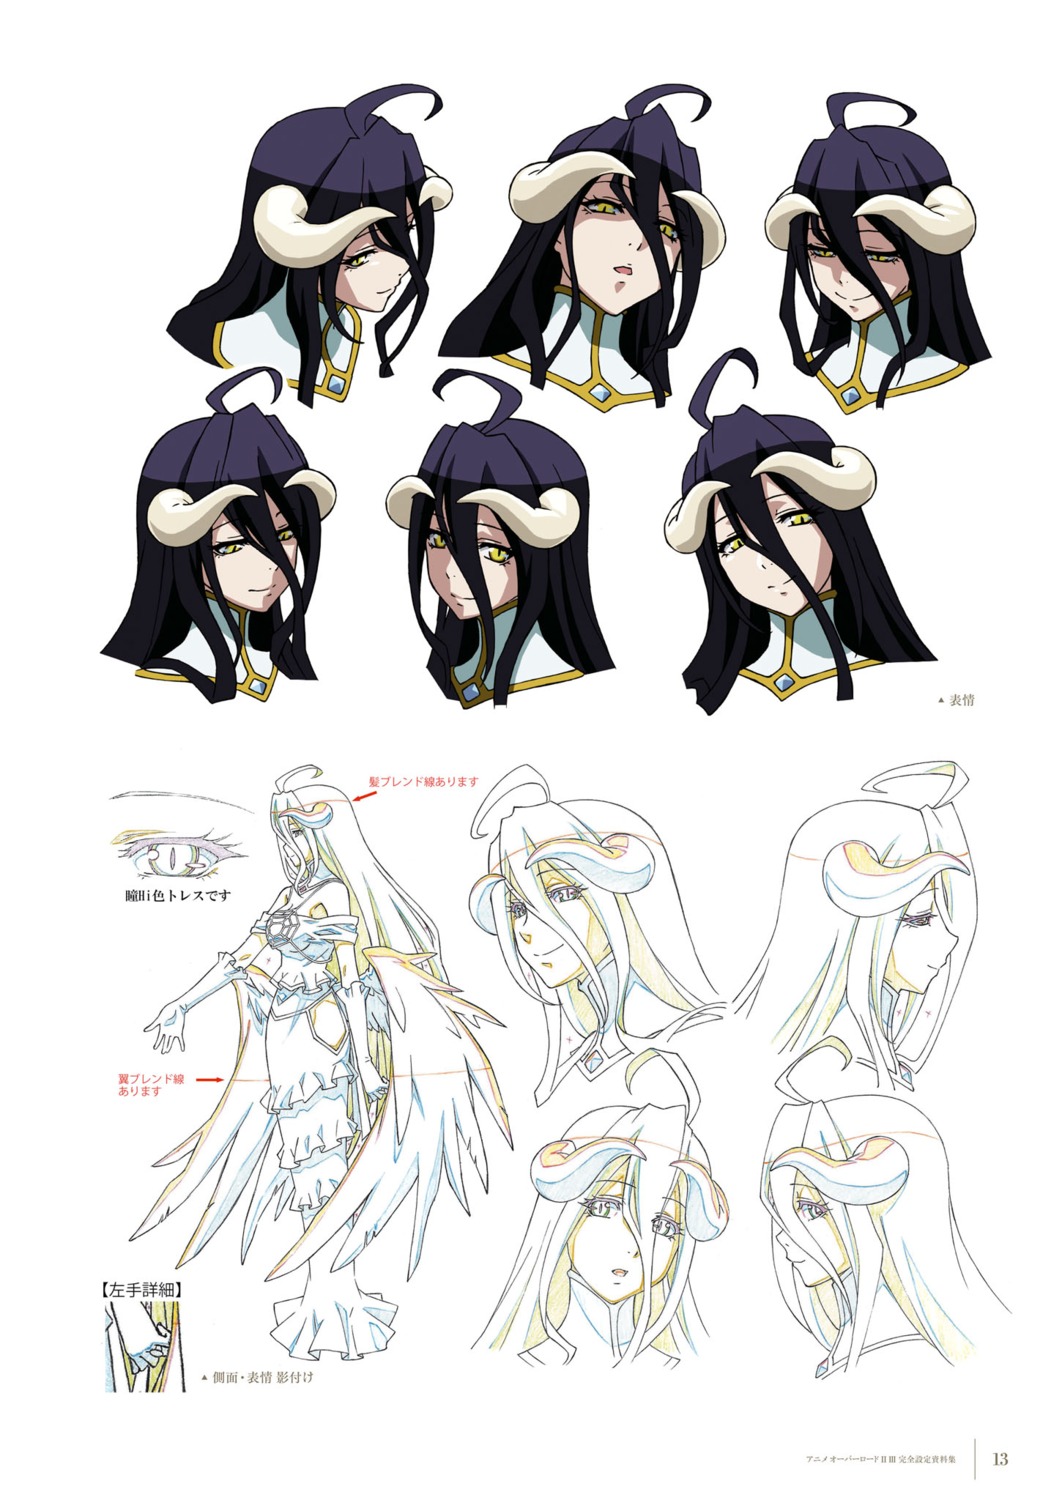 Overlord Albedo Overlord Dress Horns Sketch Wings Yande Re